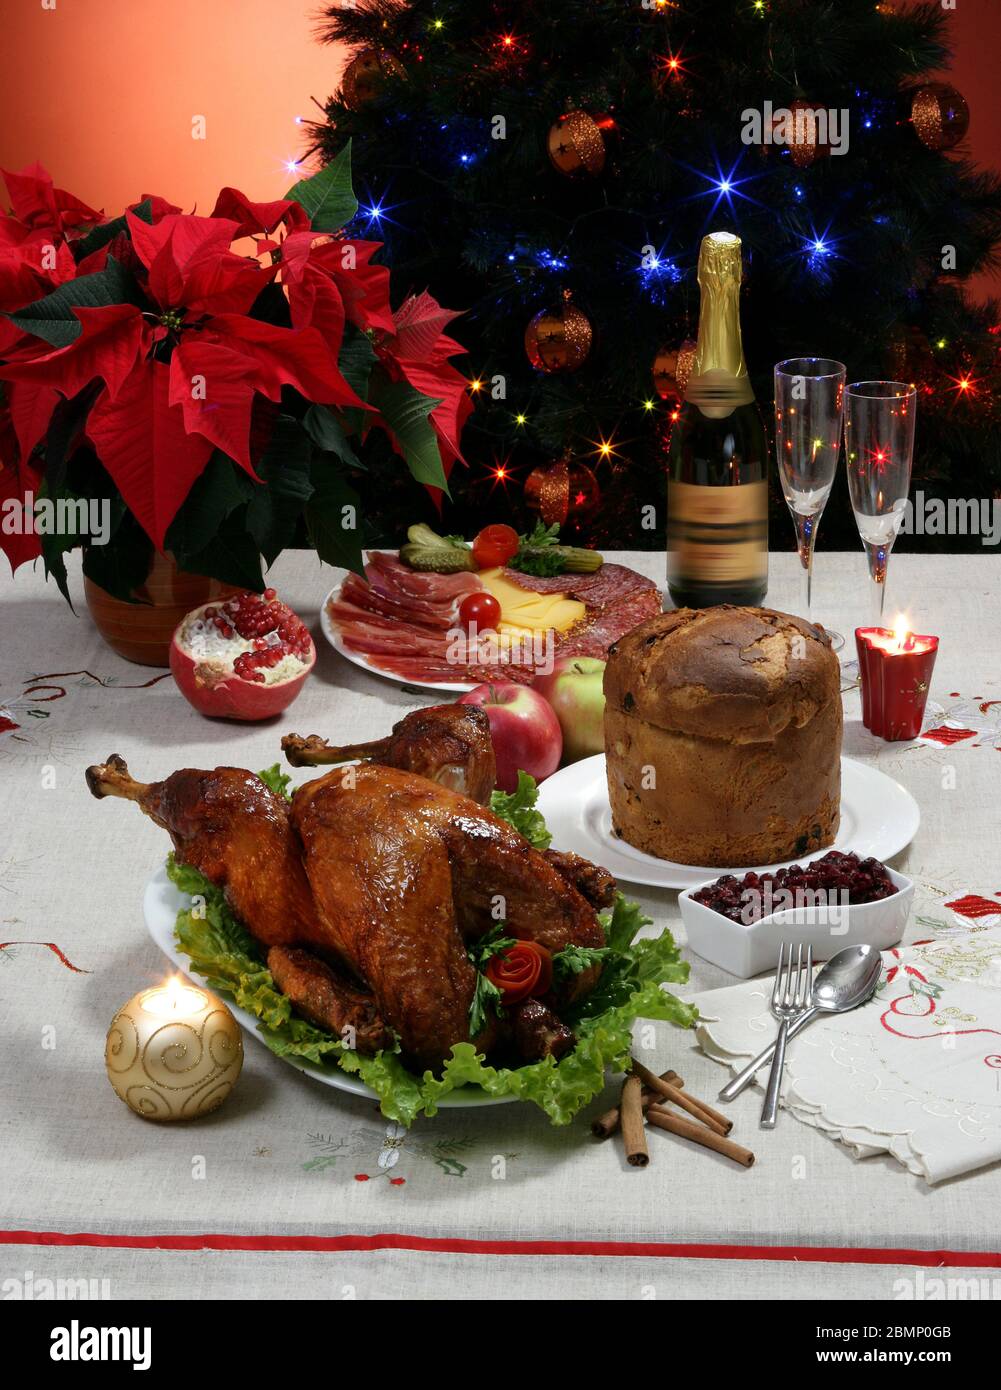 Christmas table with baked turkey, cake and champagne Stock Photo